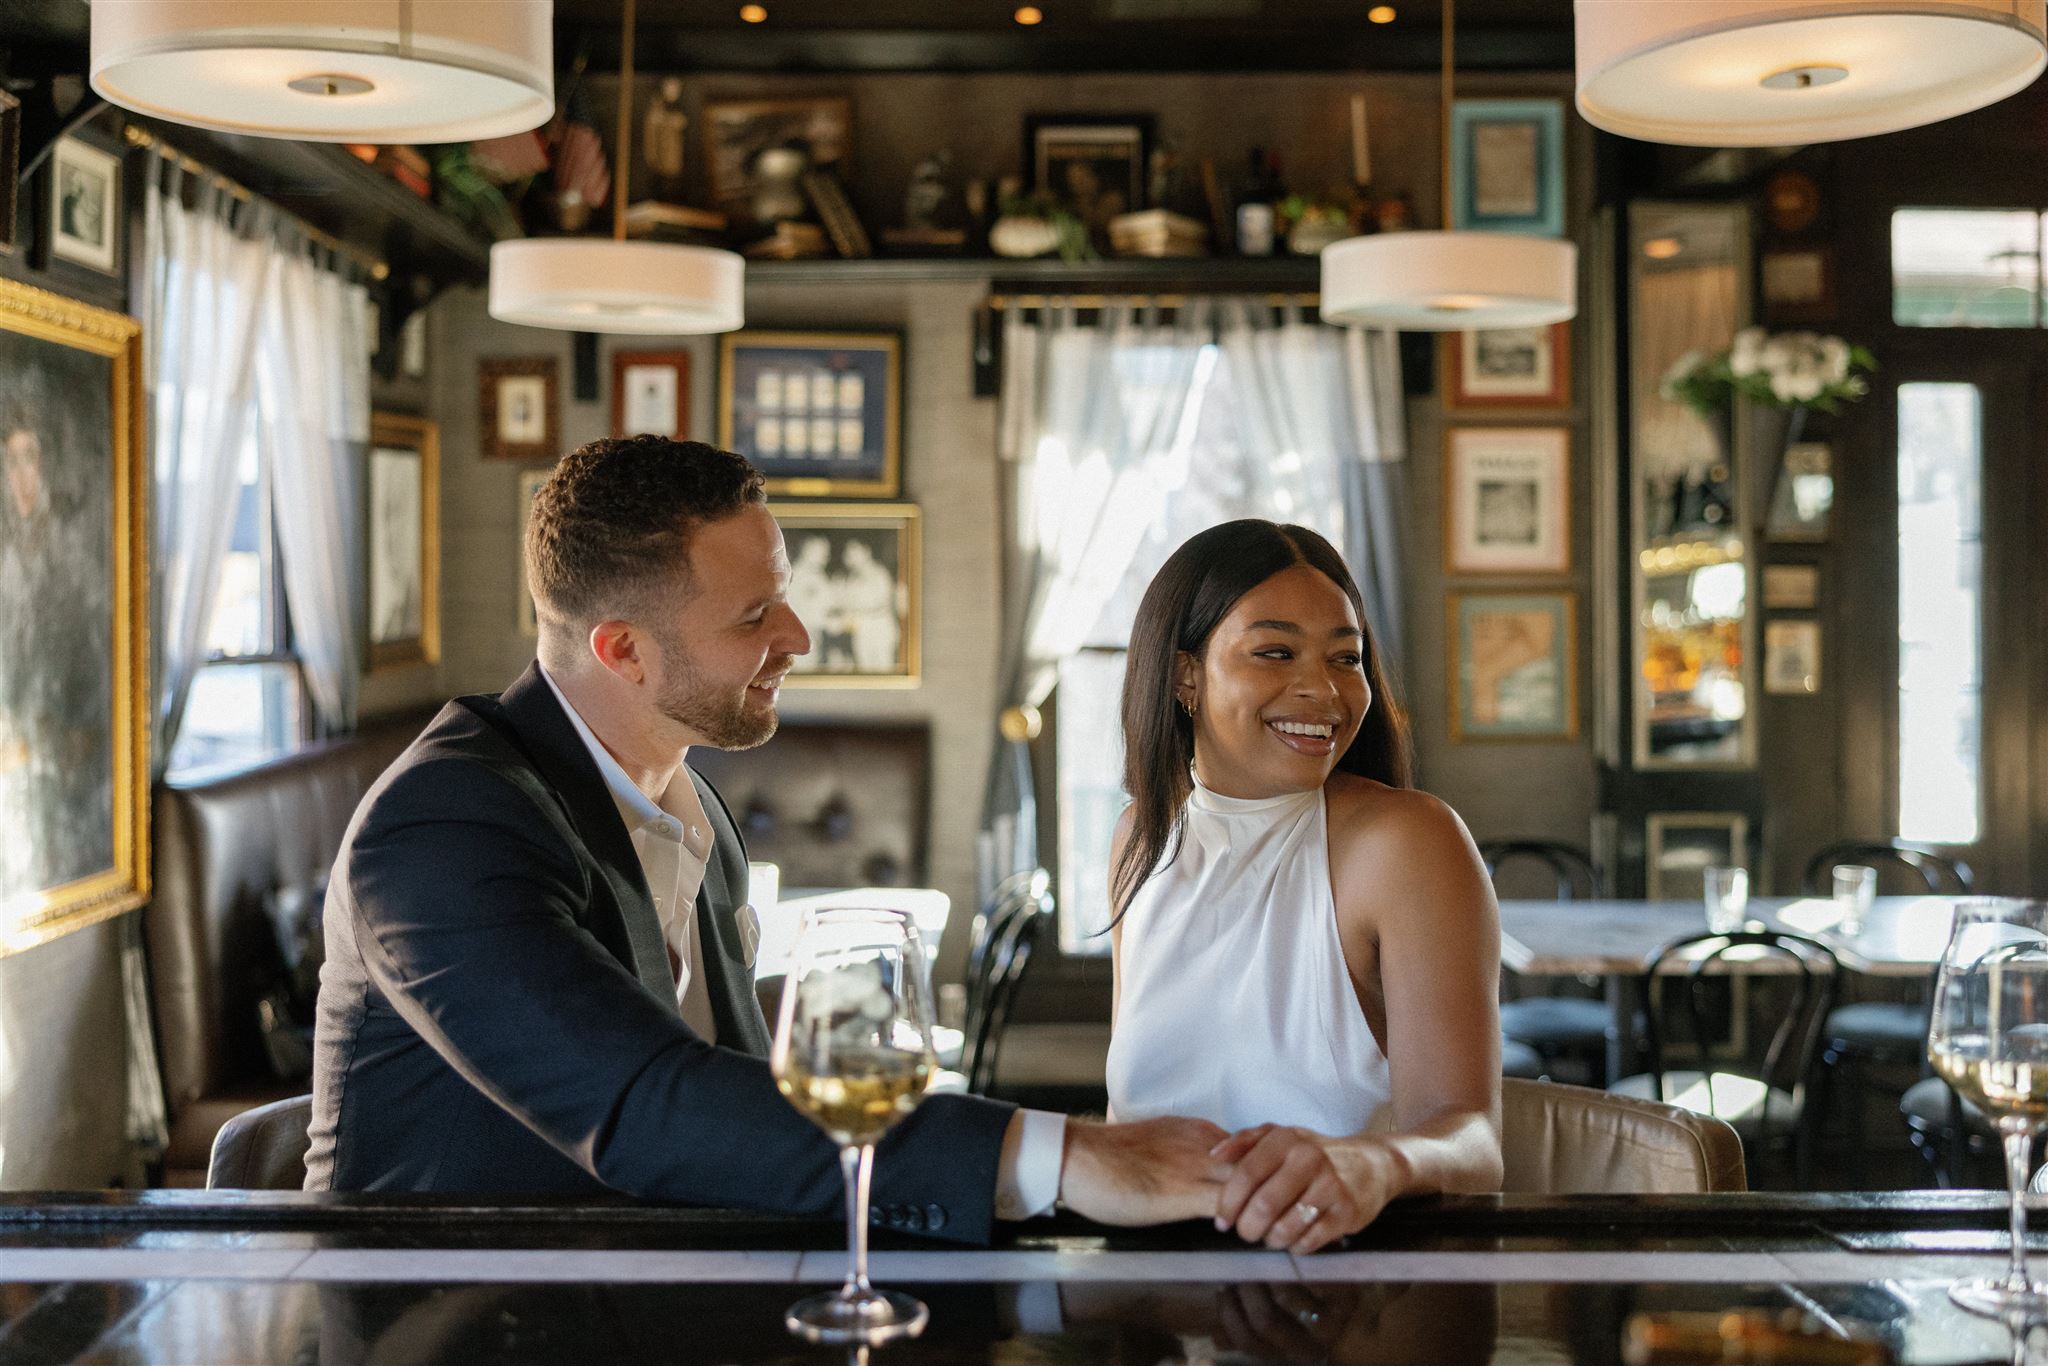 Man in suit and woman in white dress sitting at bar holding hands smiling